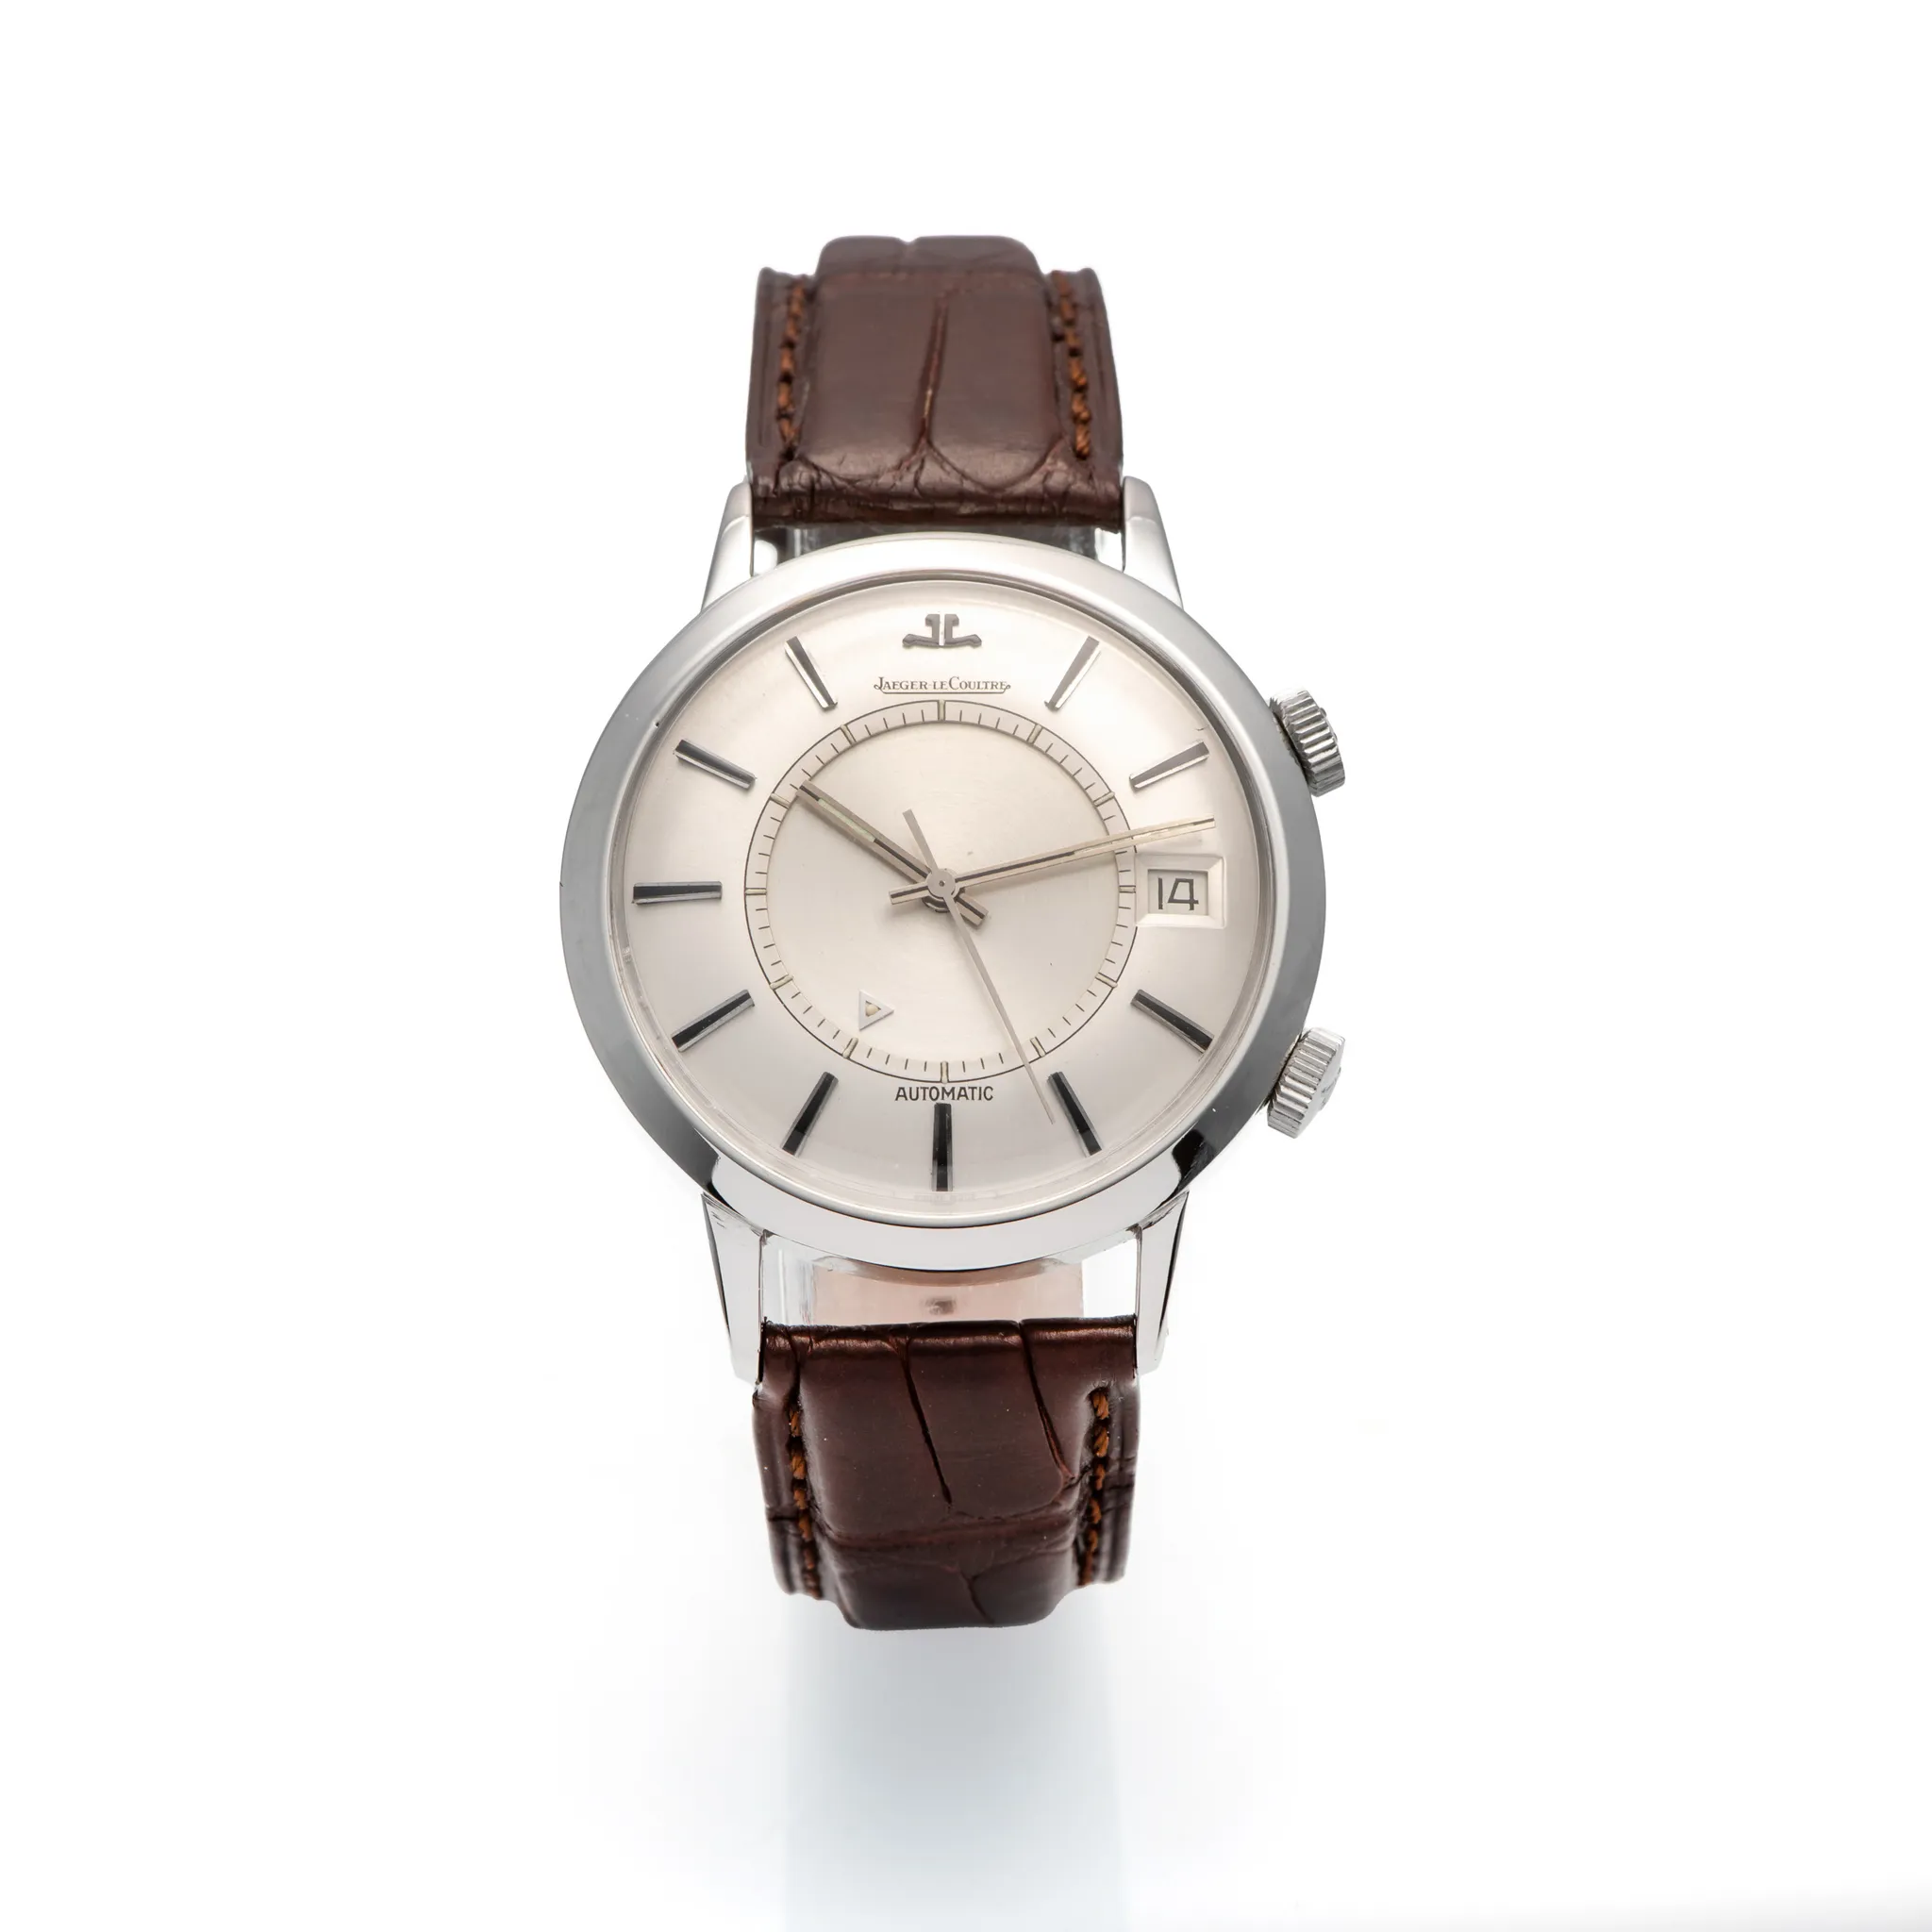 Jaeger-LeCoultre Memovox 858 37mm Stainless steel Silver